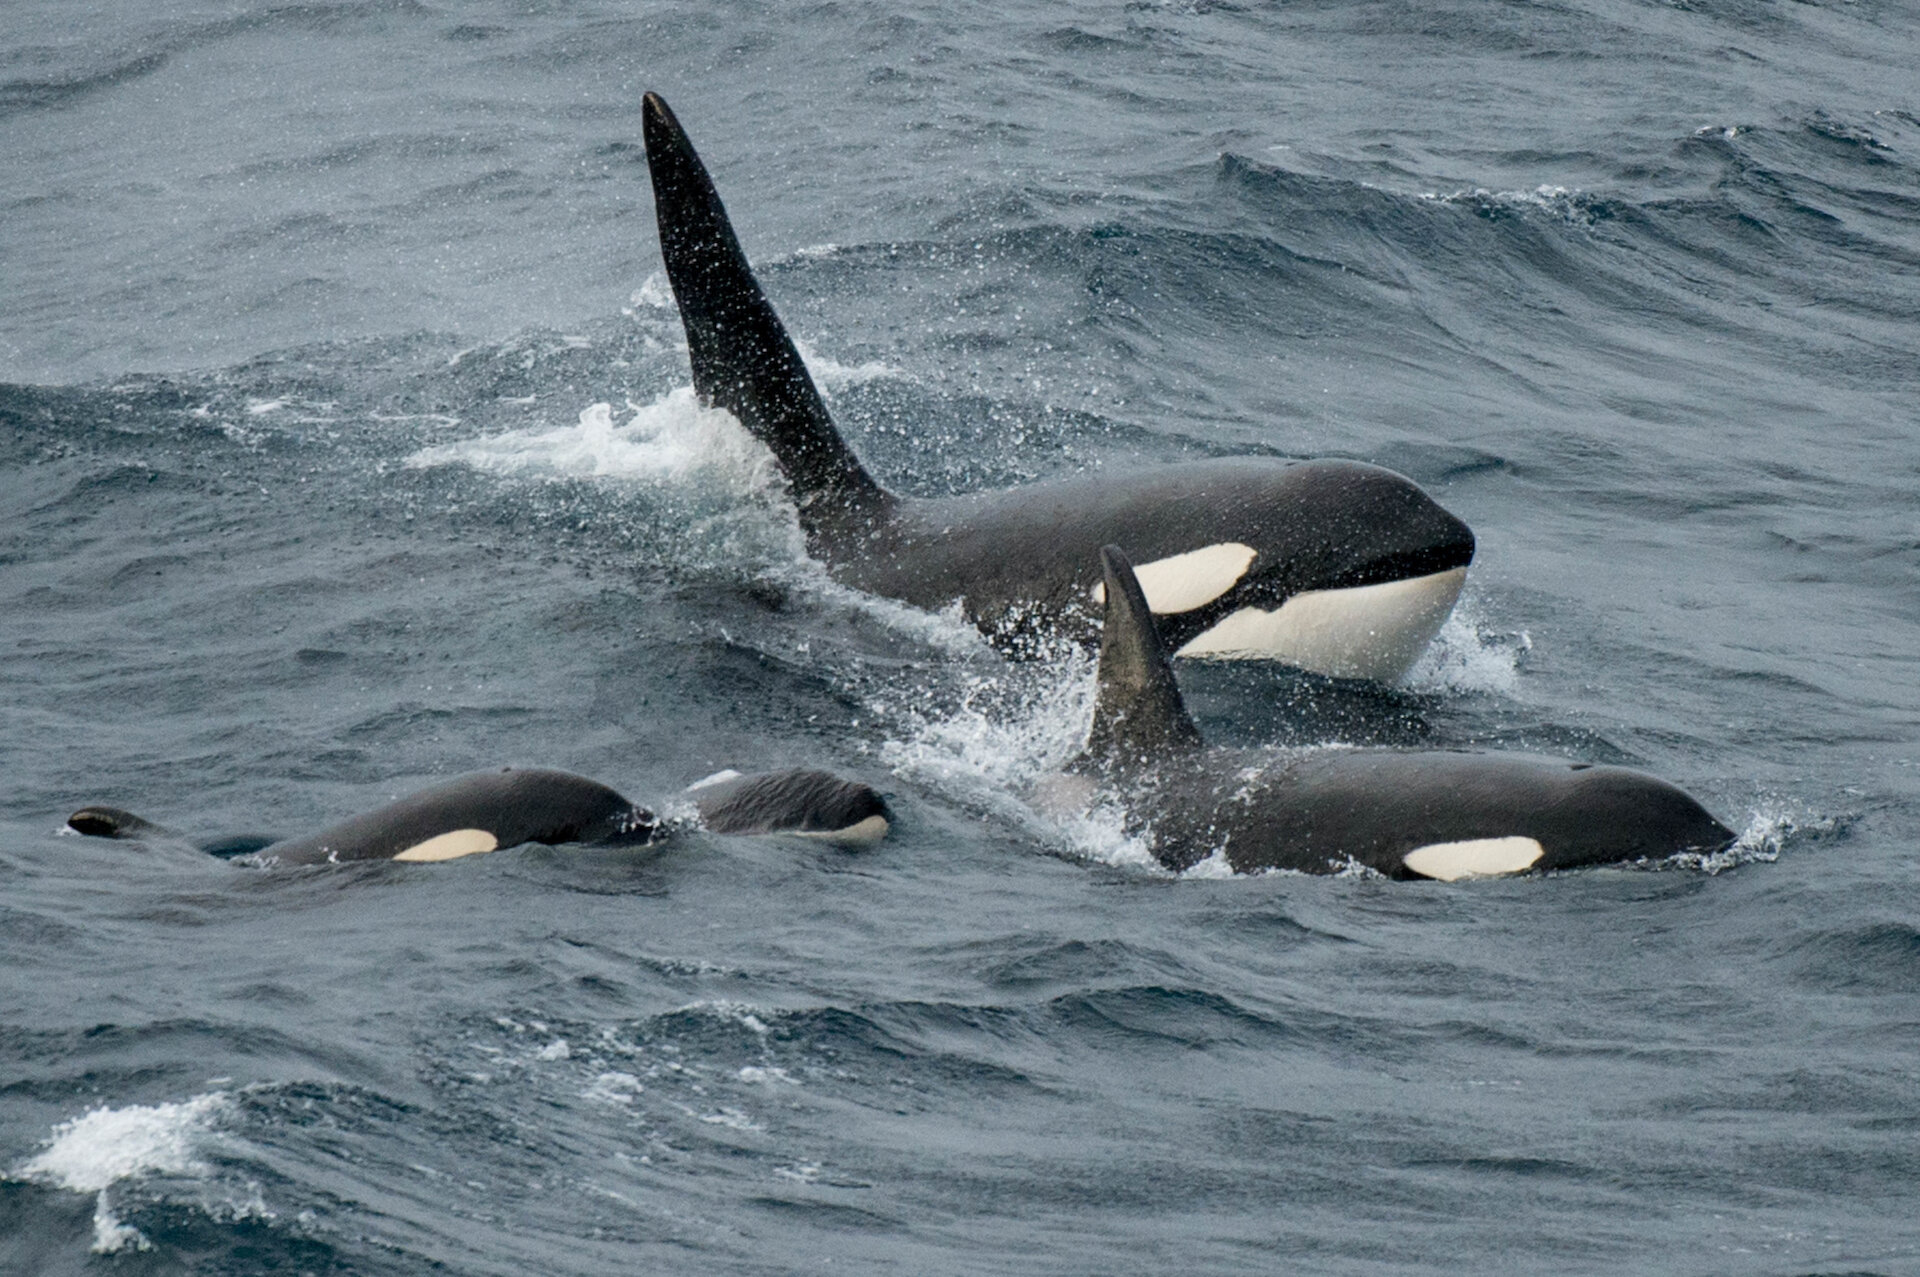 A pod of orcas surfaces in the waters off Shetland.